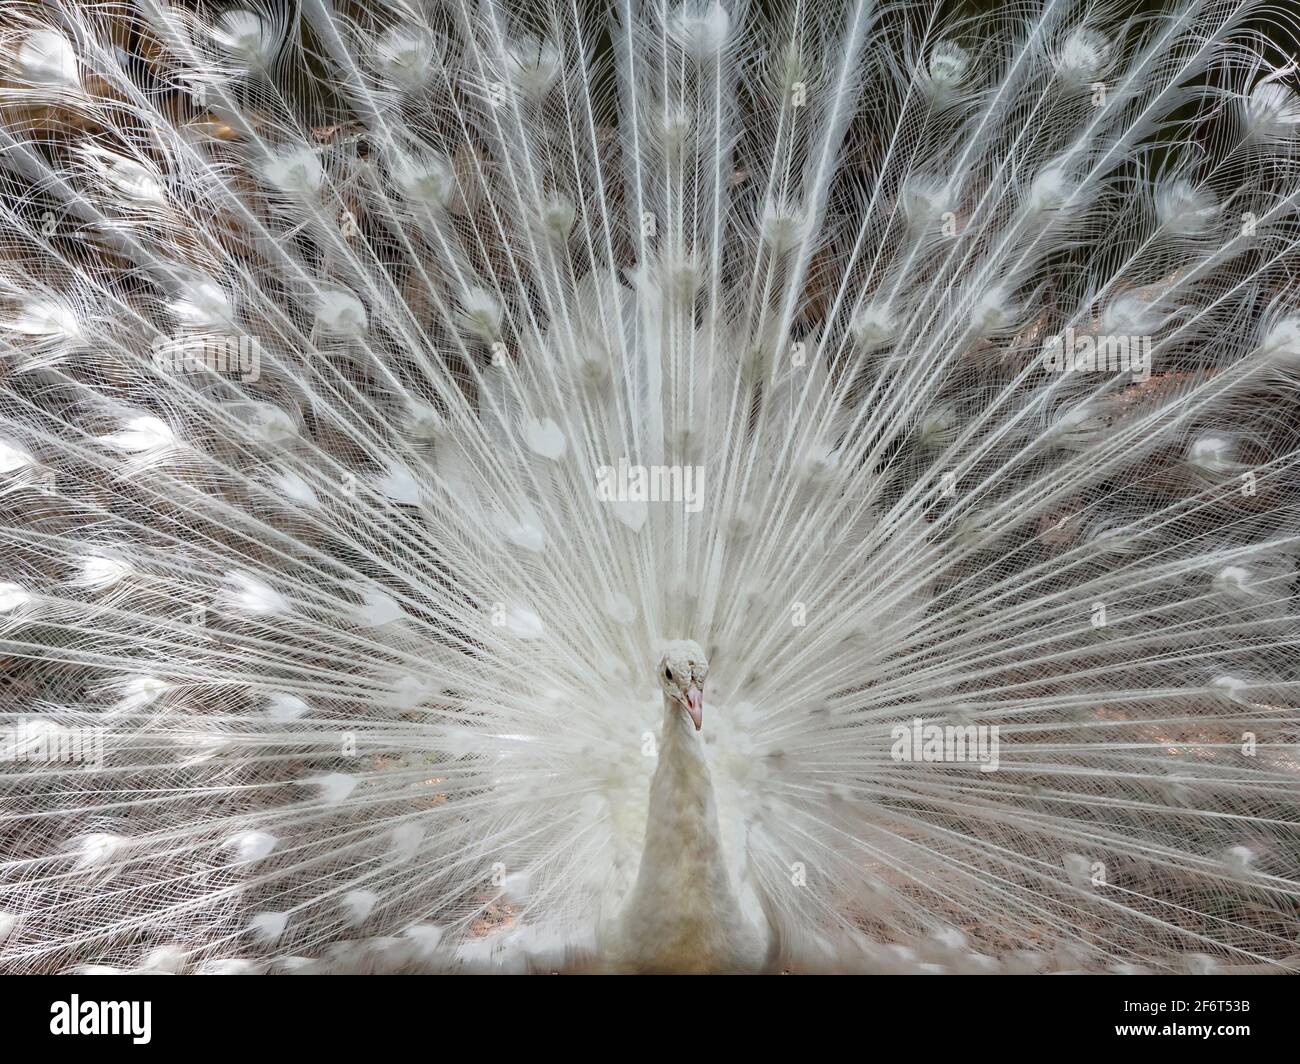 Occasionally, peafowl appear with white plumage. Although albino peafowl do exist, this is quite rare and almost all white peafowl are not, in fact, Stock Photo